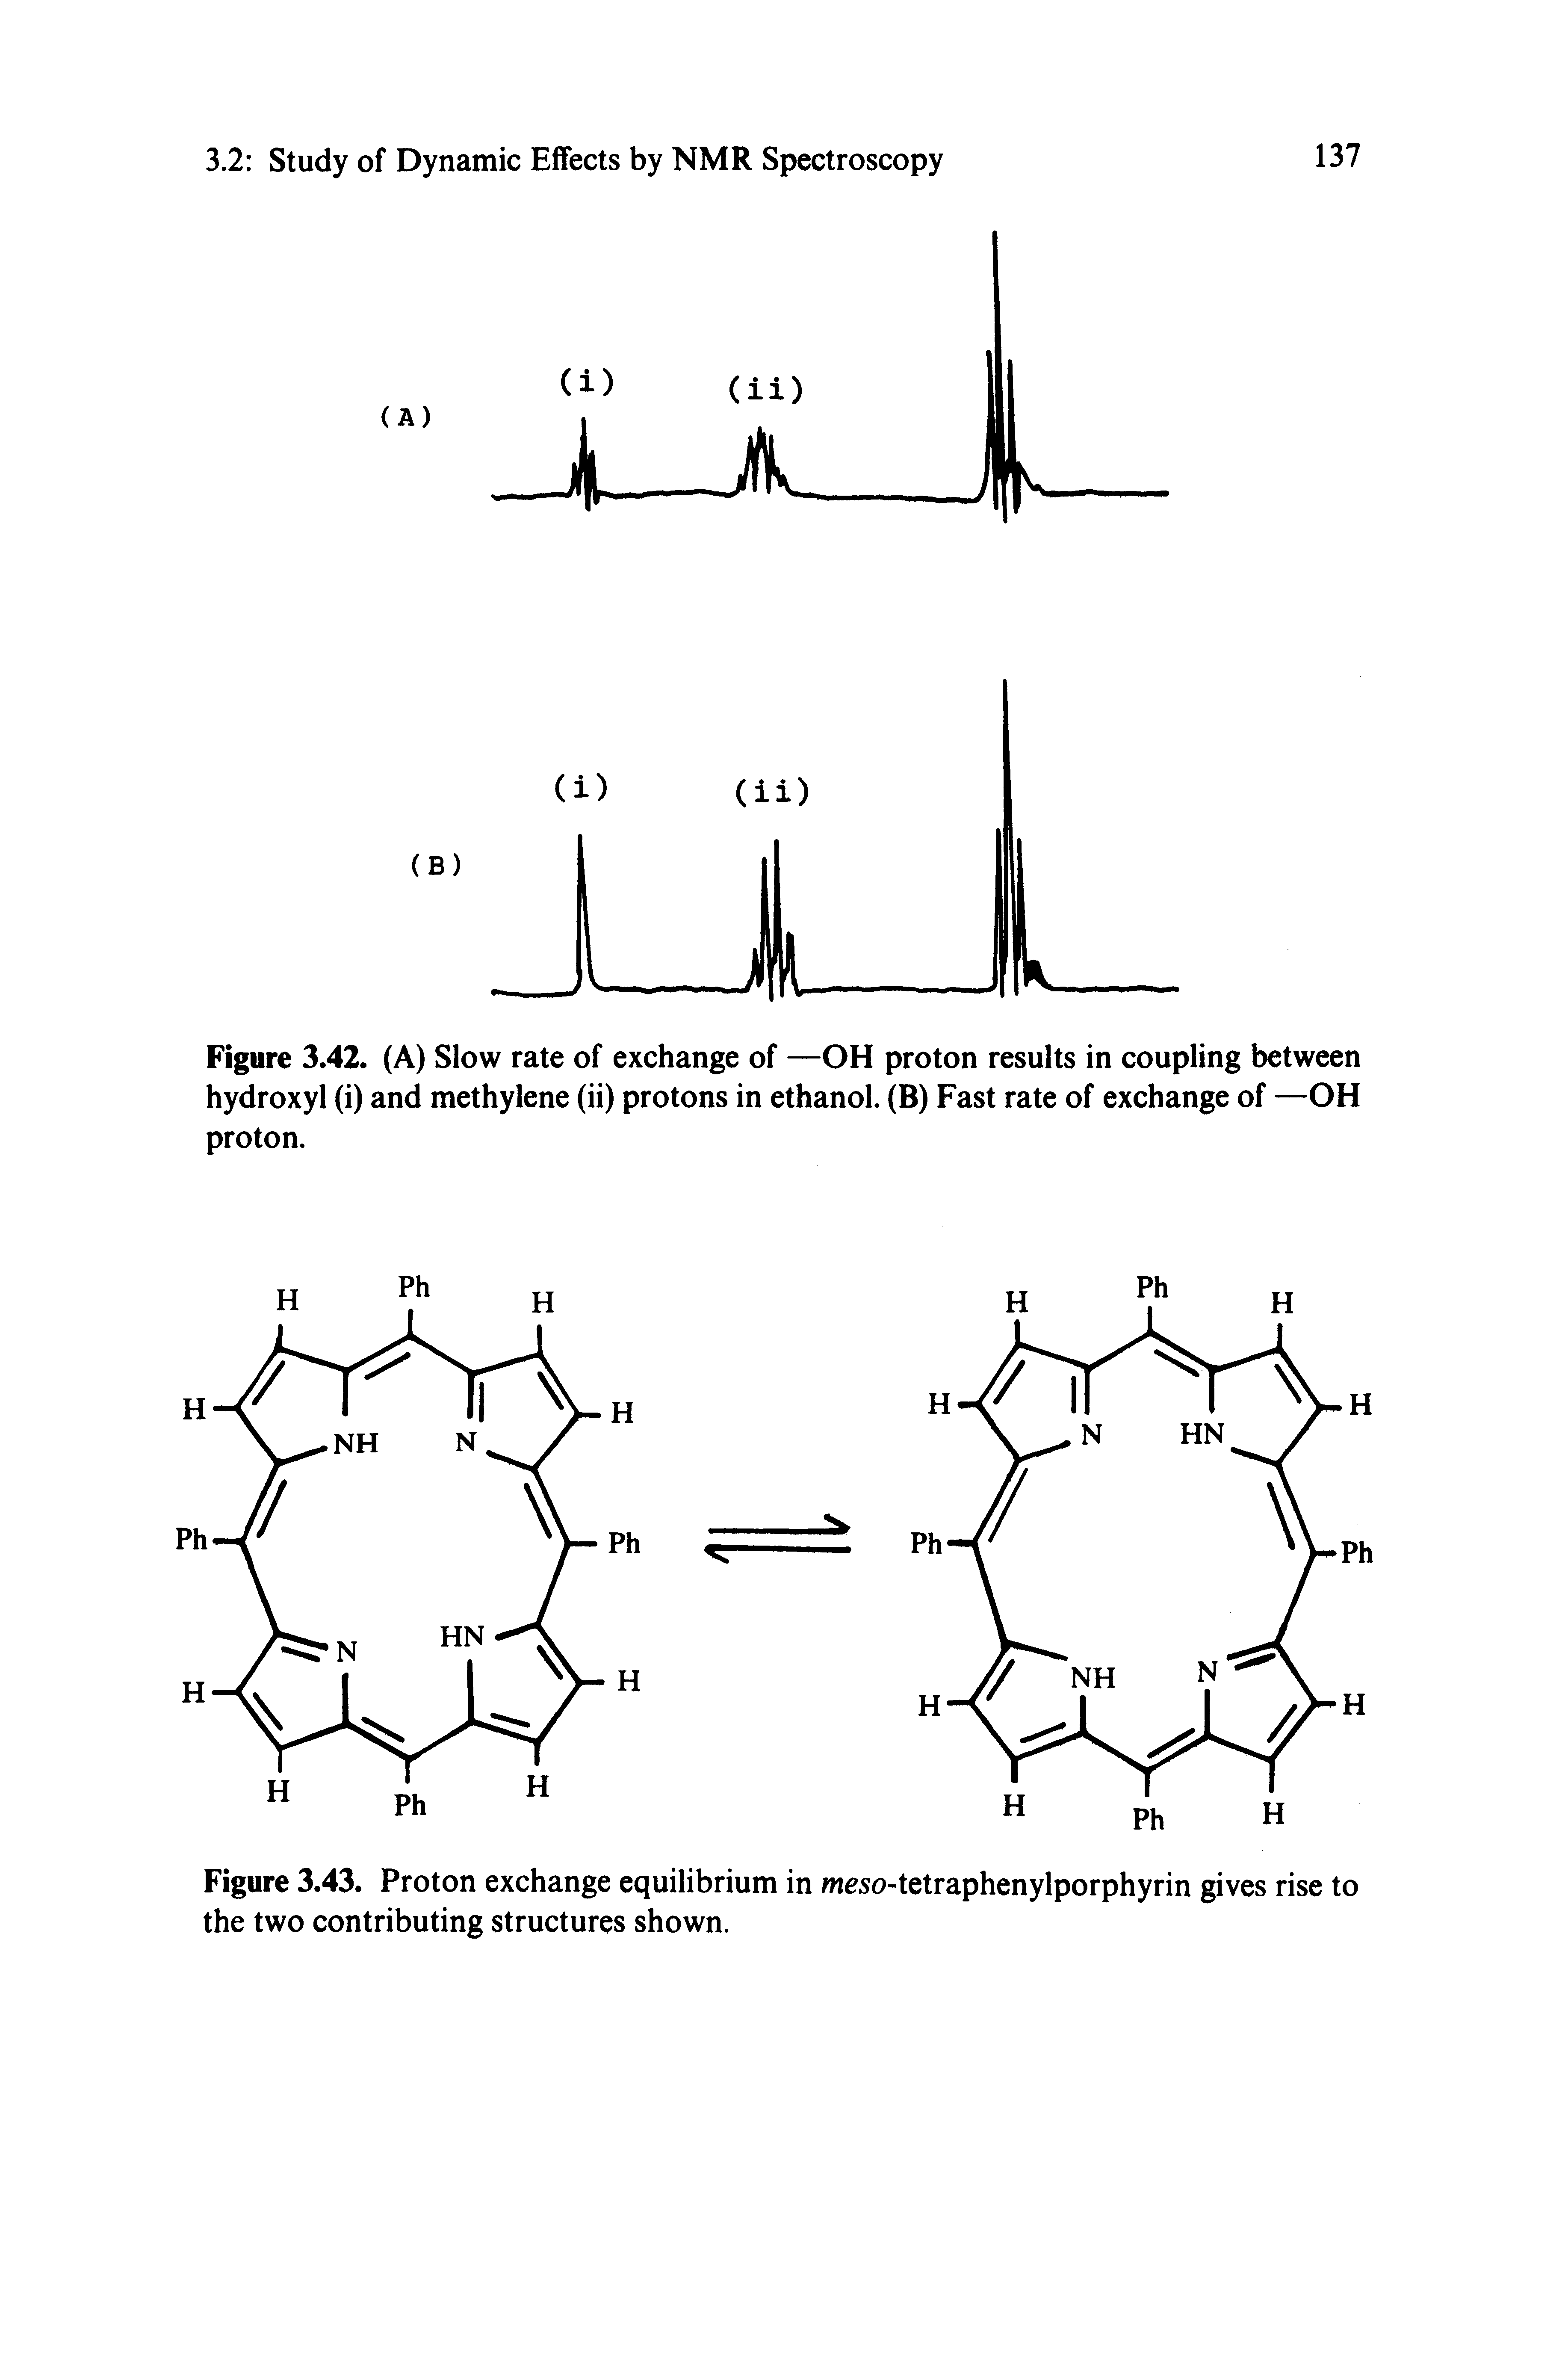 Figure 3.43. Proton exchange equilibrium in meso-tetraphenylporphyrin gives rise to the two contributing structures shown.